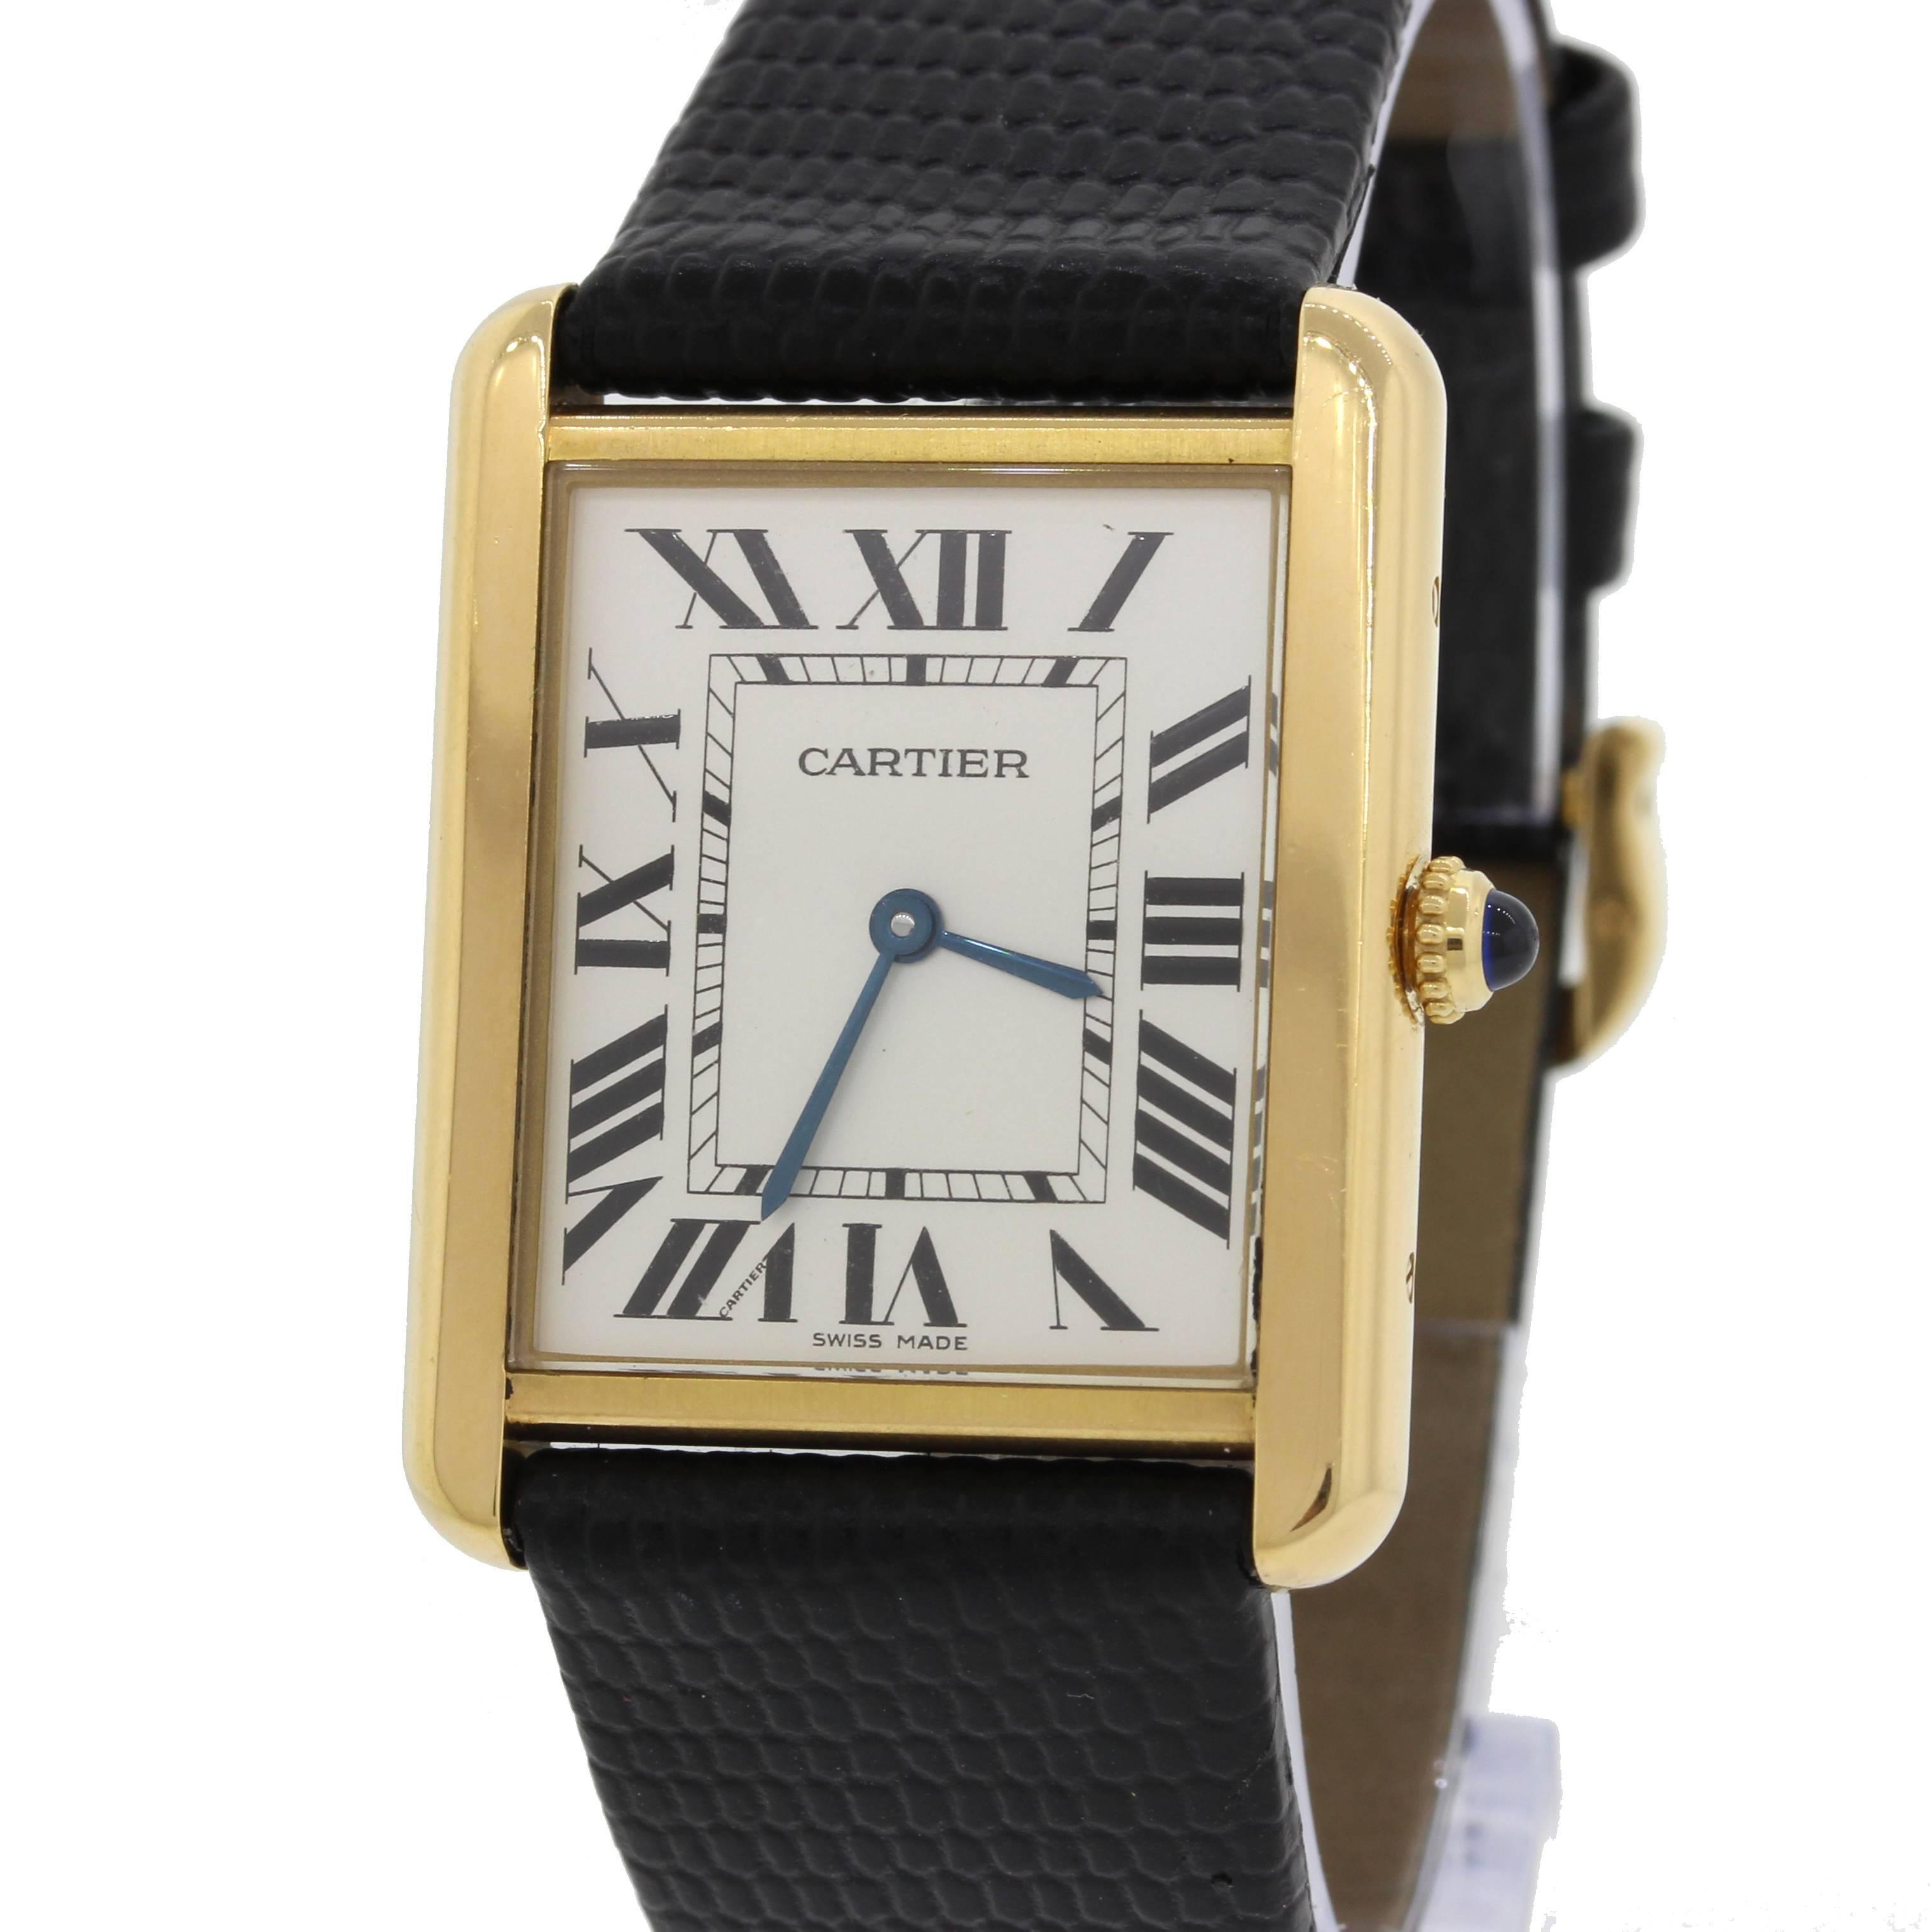 Cartier Tank Solo 18k Yellow and White Gold Roman Black Leather Watch.

Brand       Cartier (Guaranteed Authentic)
Model 	Tank Solo

Reference Number   2742
Serial Number 	751276**

Gender 	Unisex
Metal 	18k Yellow Gold

Case Size 	26mm X